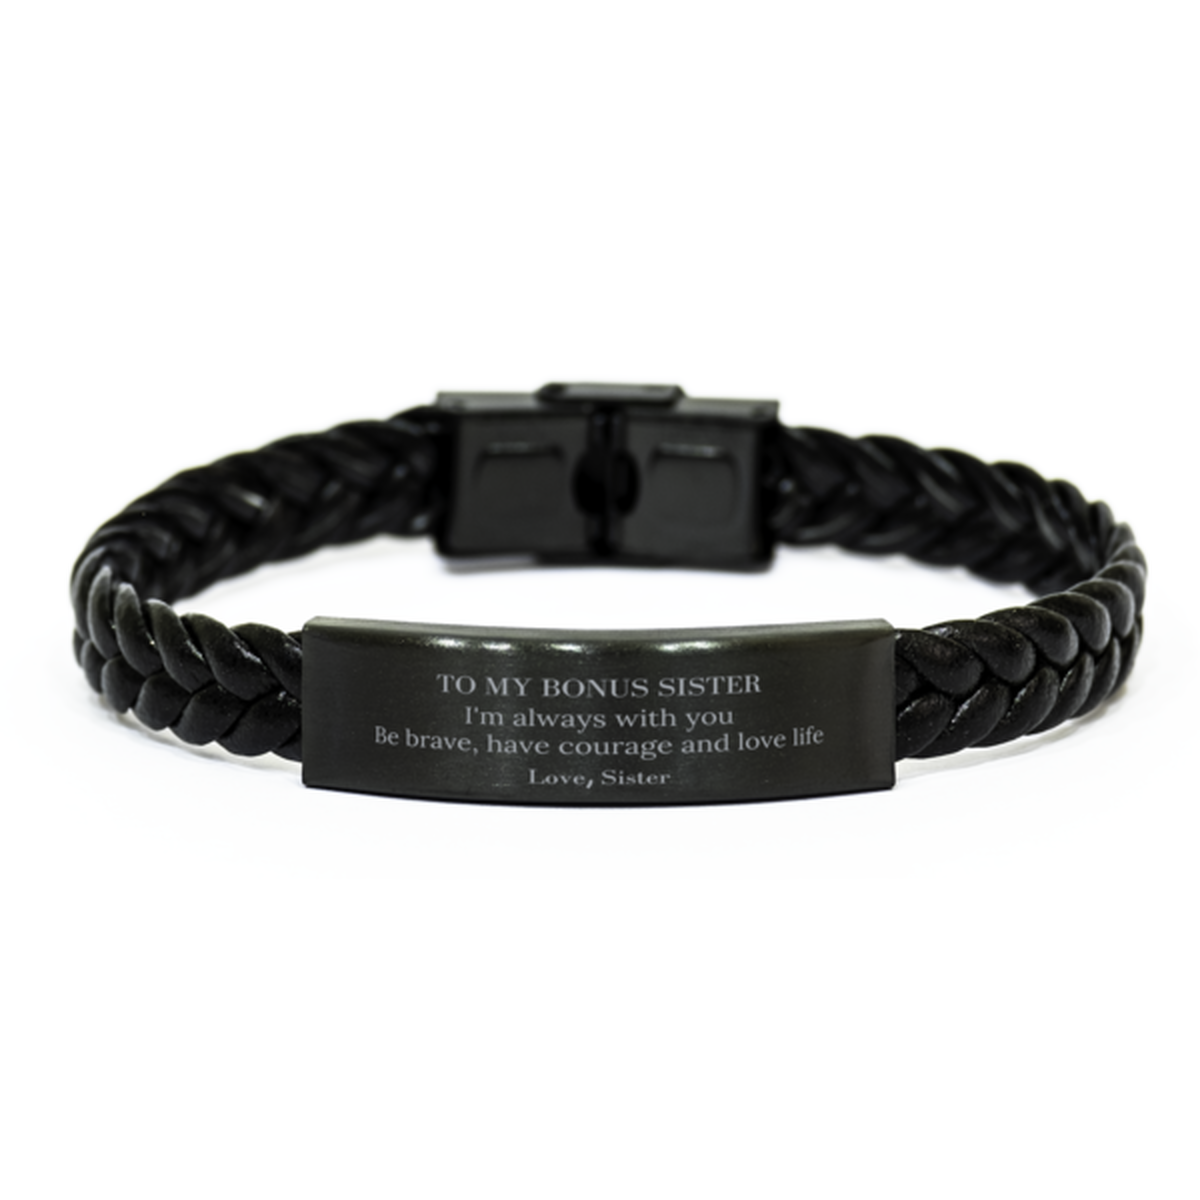 To My Bonus Sister Gifts from Sister, Unique Braided Leather Bracelet Inspirational Christmas Birthday Graduation Gifts for Bonus Sister I'm always with you. Be brave, have courage and love life. Love, Sister